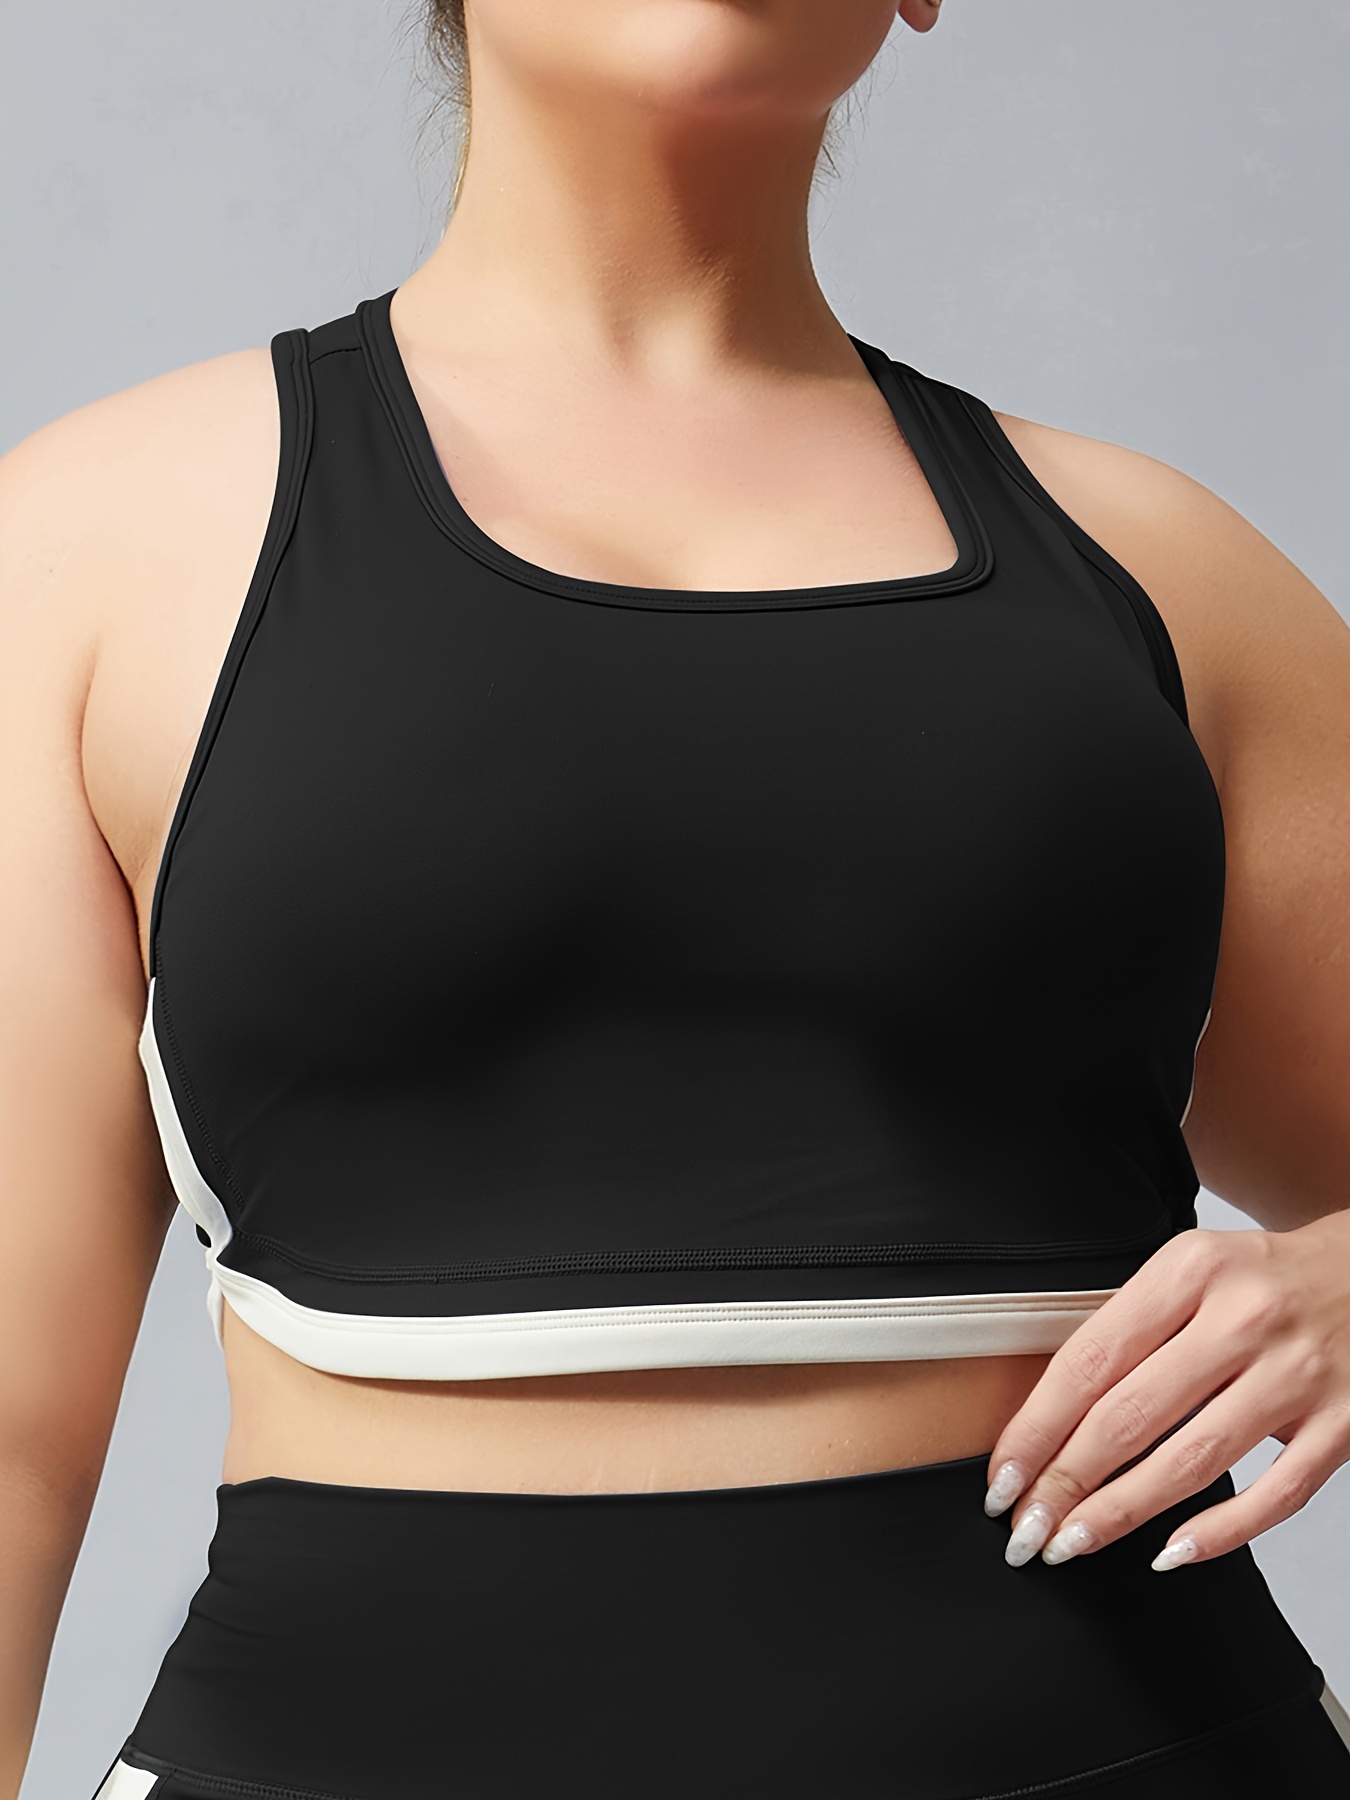 Front Cross Side Lace Wireless Supportive Sports Bra Gym Running Gathering  High-Intensity Fitness Top Seamless